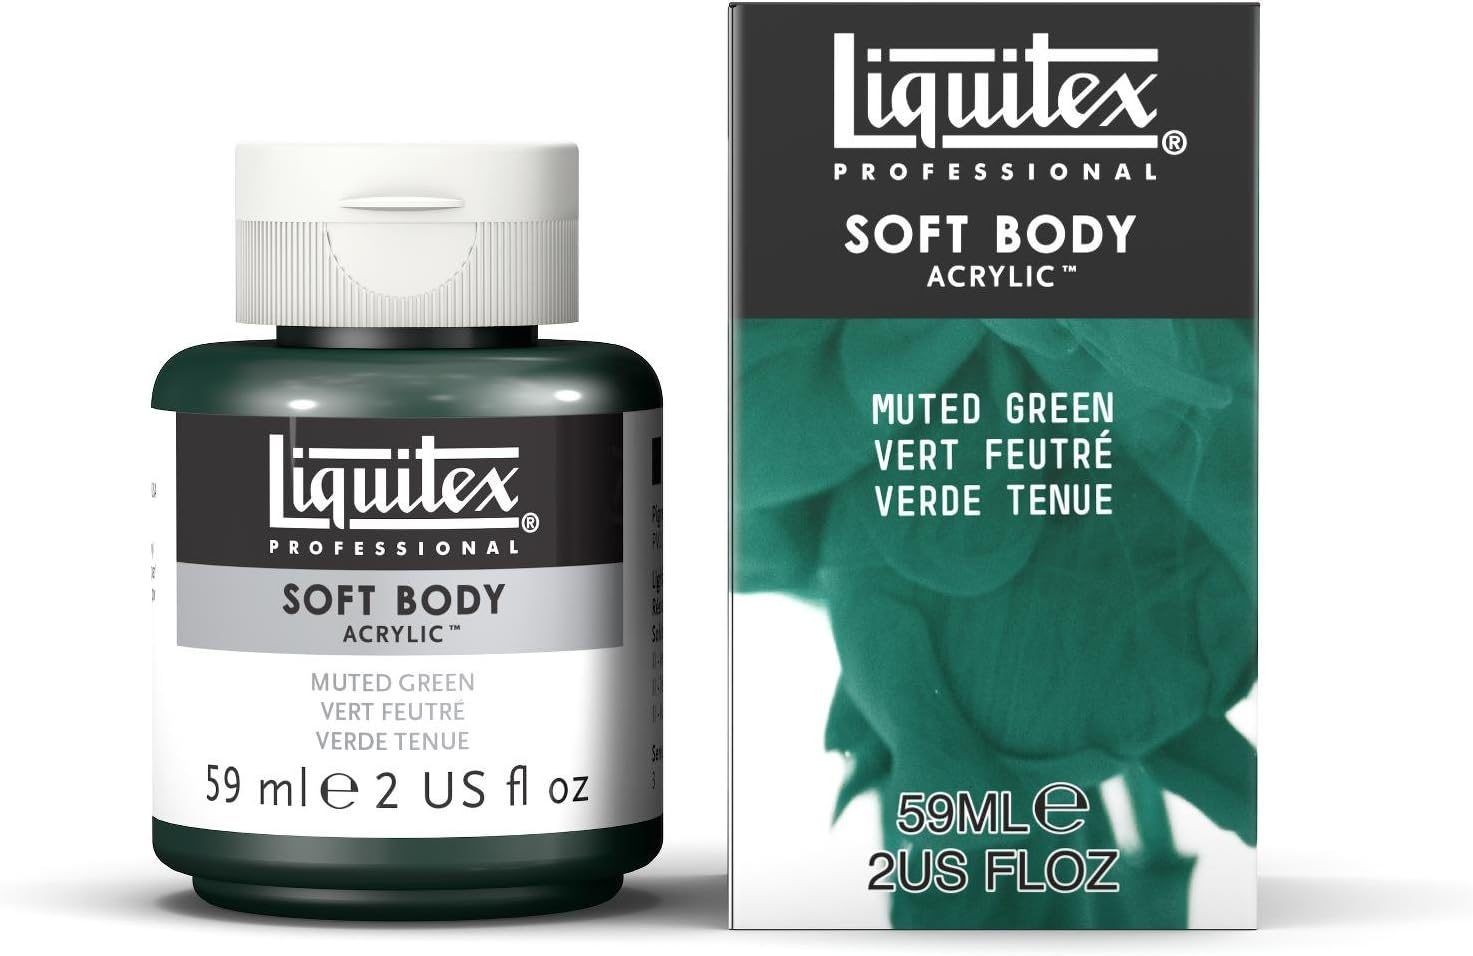 Liquitex Special Release Collection Soft Body Acrylic [...]